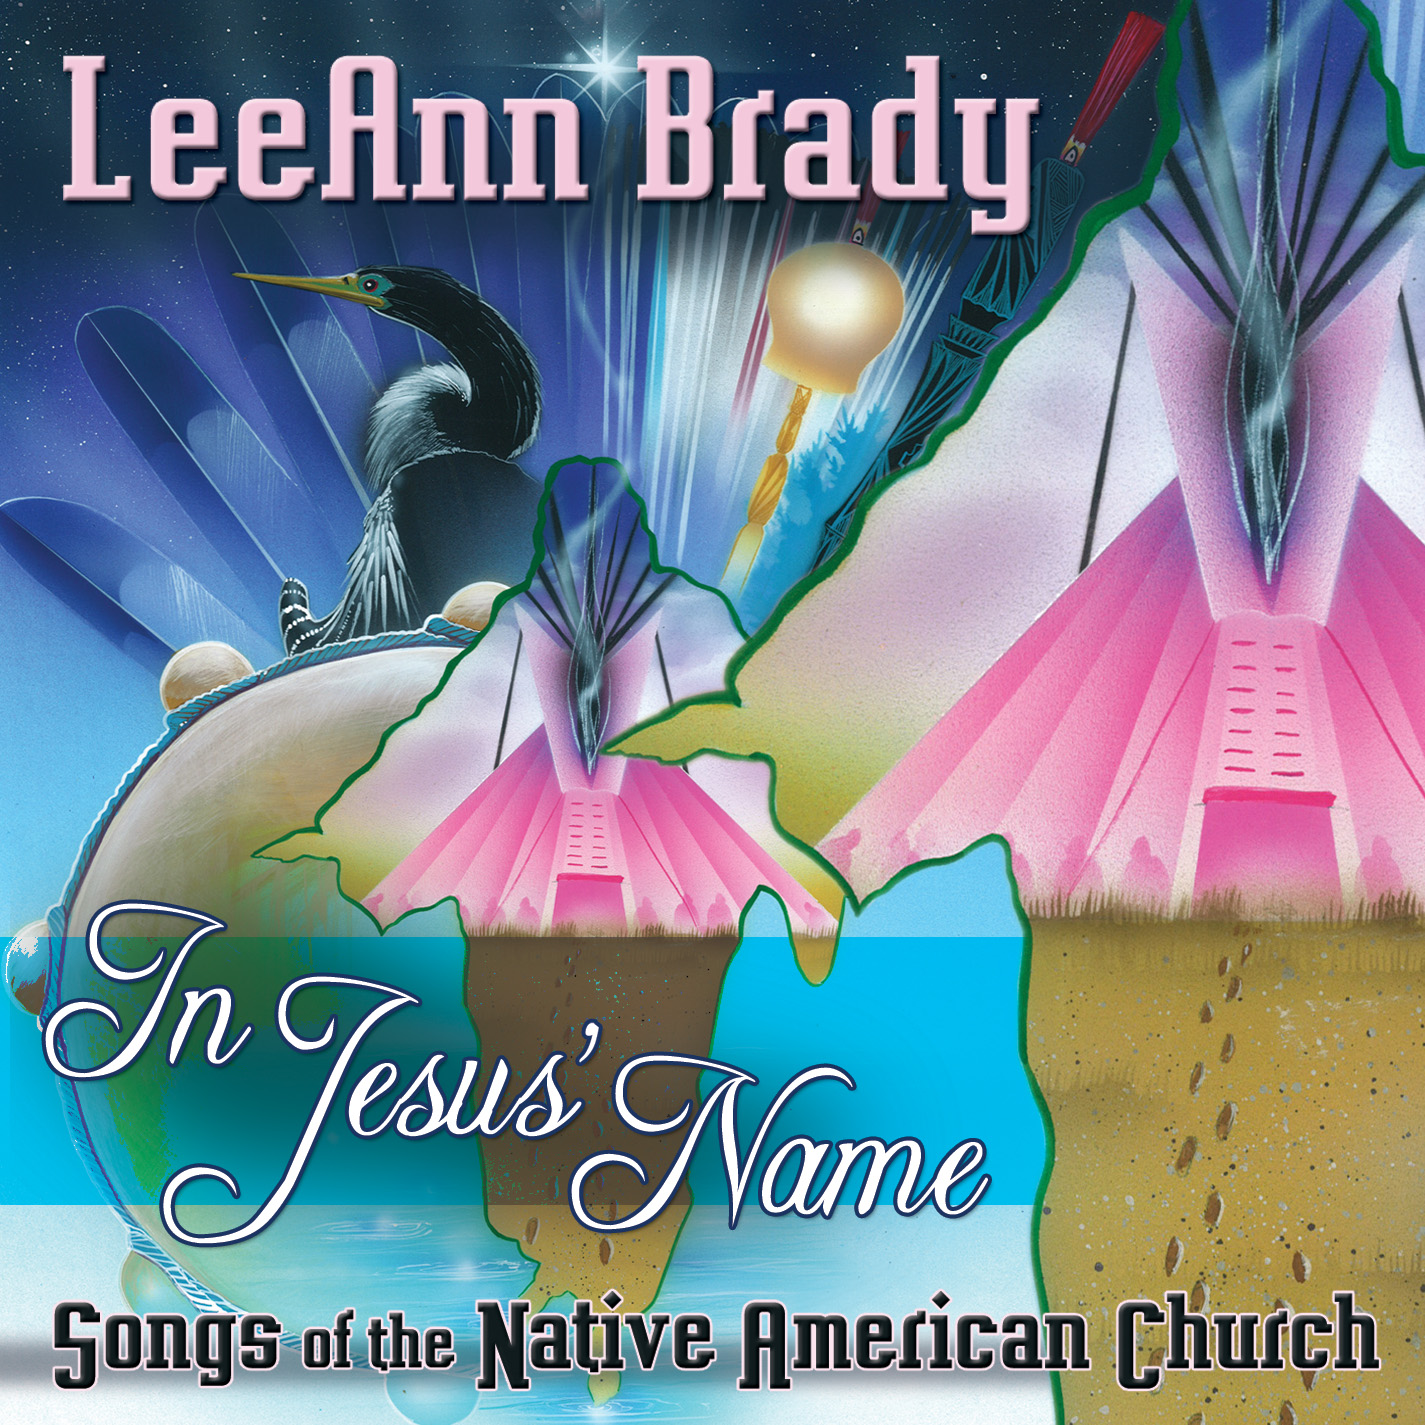 IN JESUS NAME: SONGS OF THE NATIVE AMERICAN CHURCH